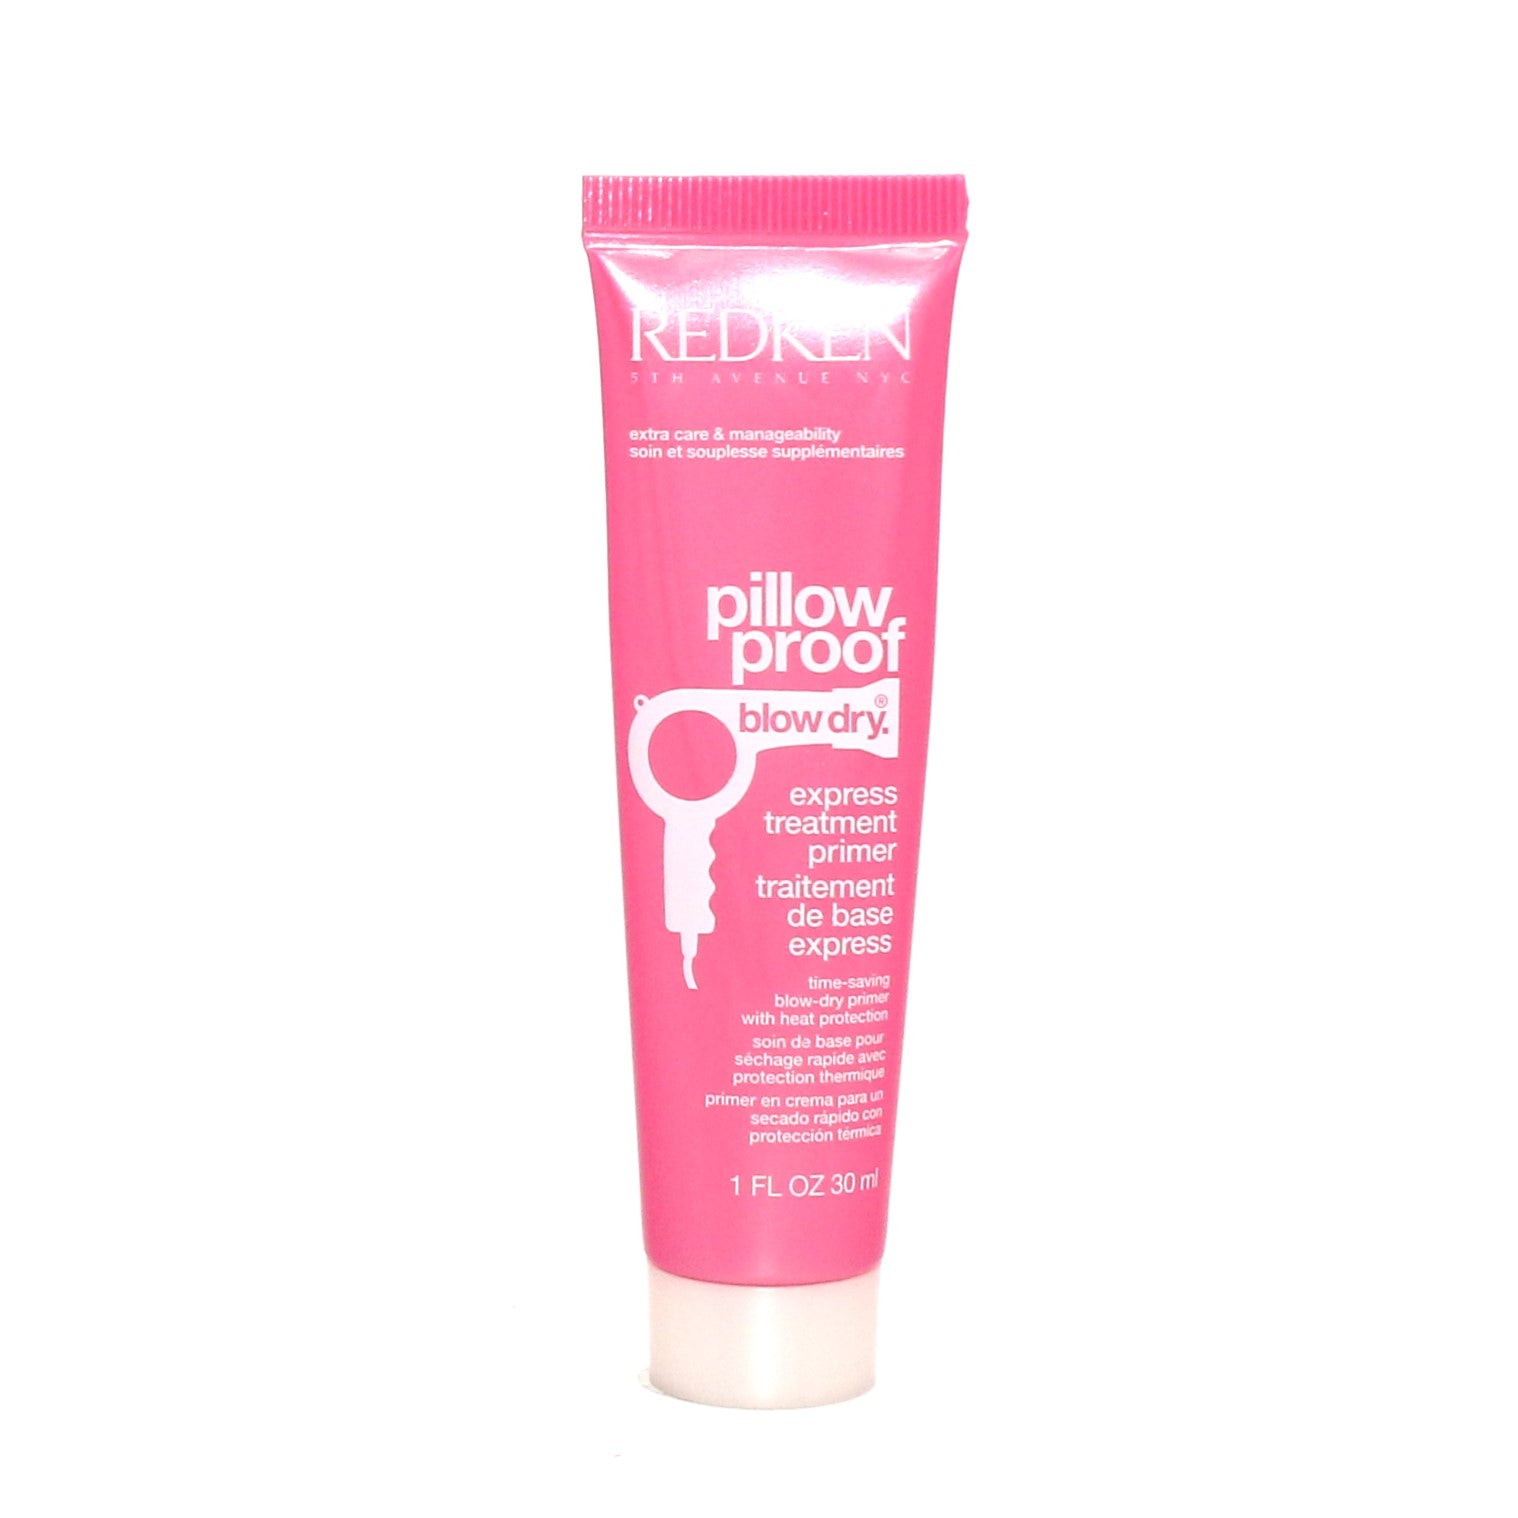 Redken Pillow Proof Blow Dry Express Treatment Primer 1 oz (Pack of 2)